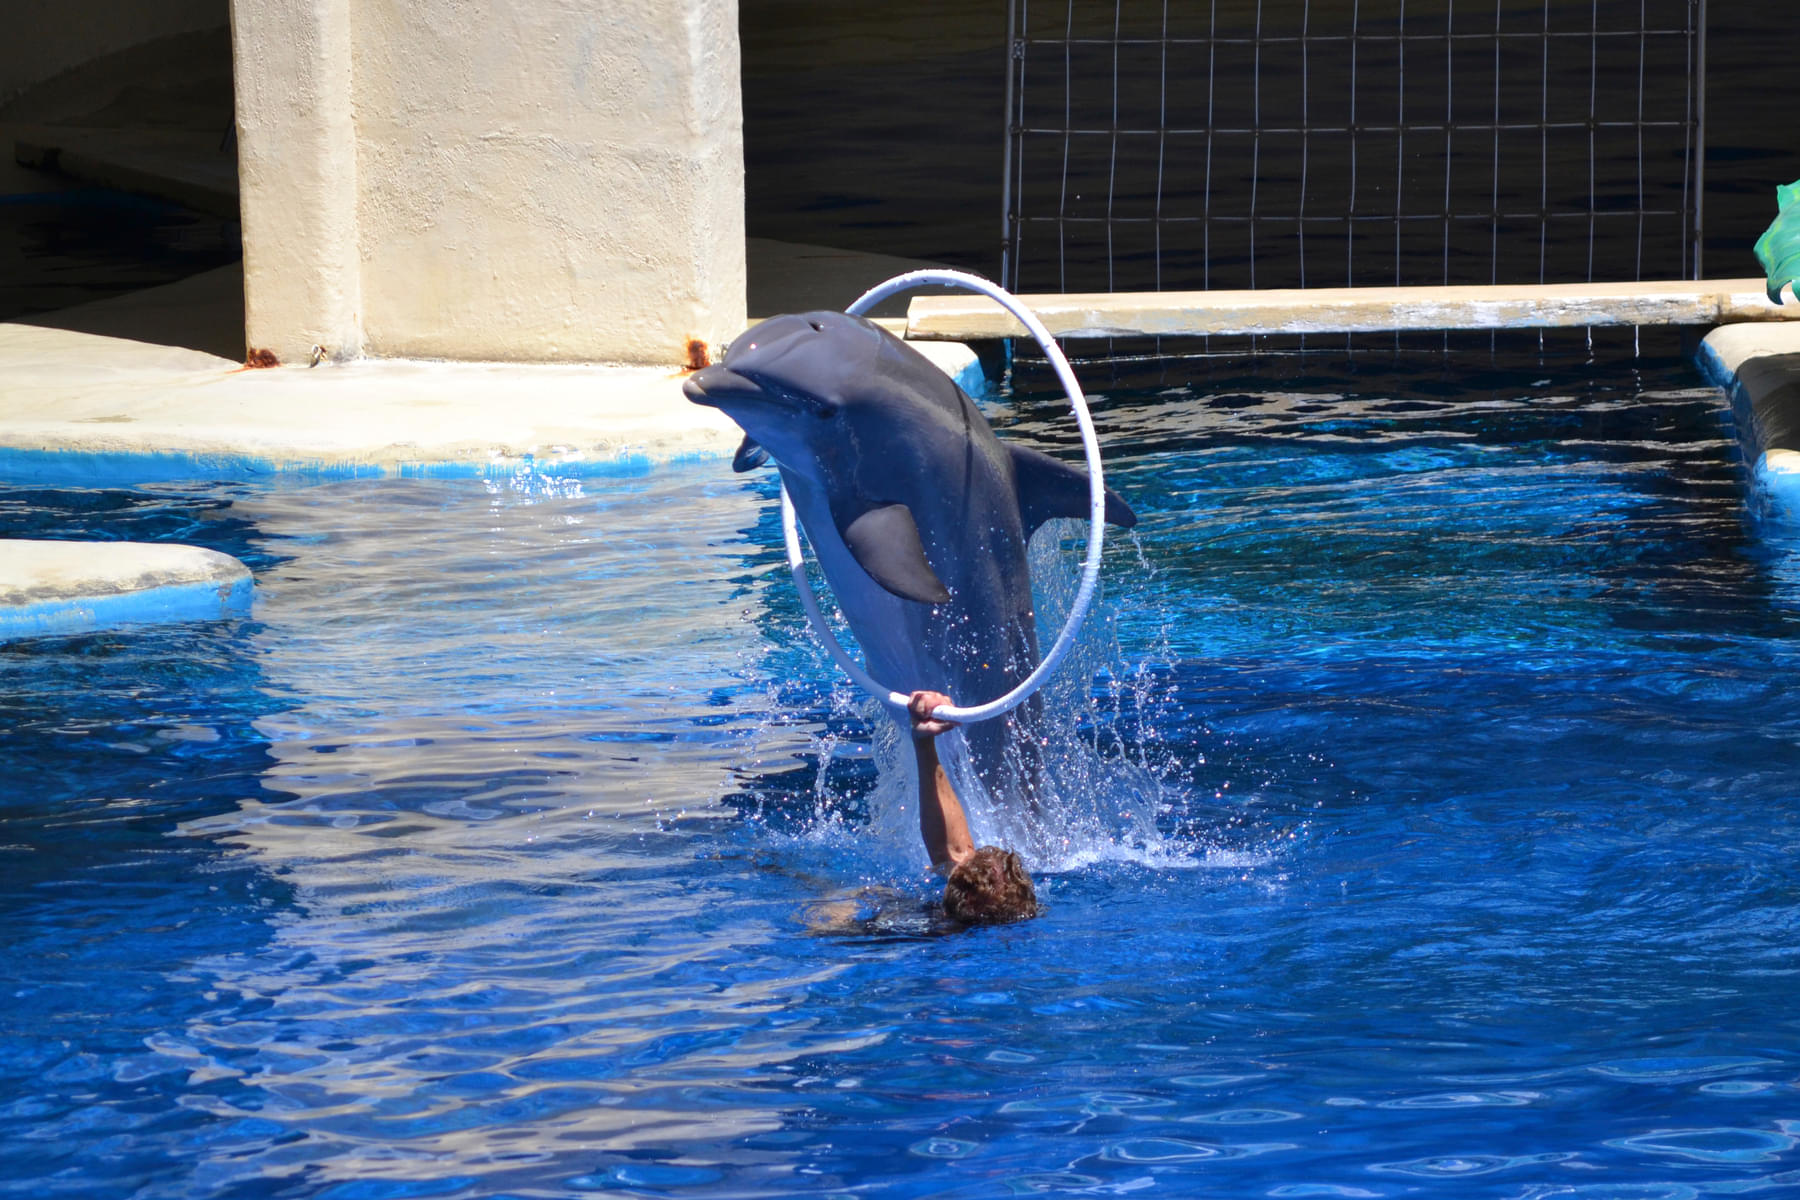 Enjoy seeing the adorable dolphins play